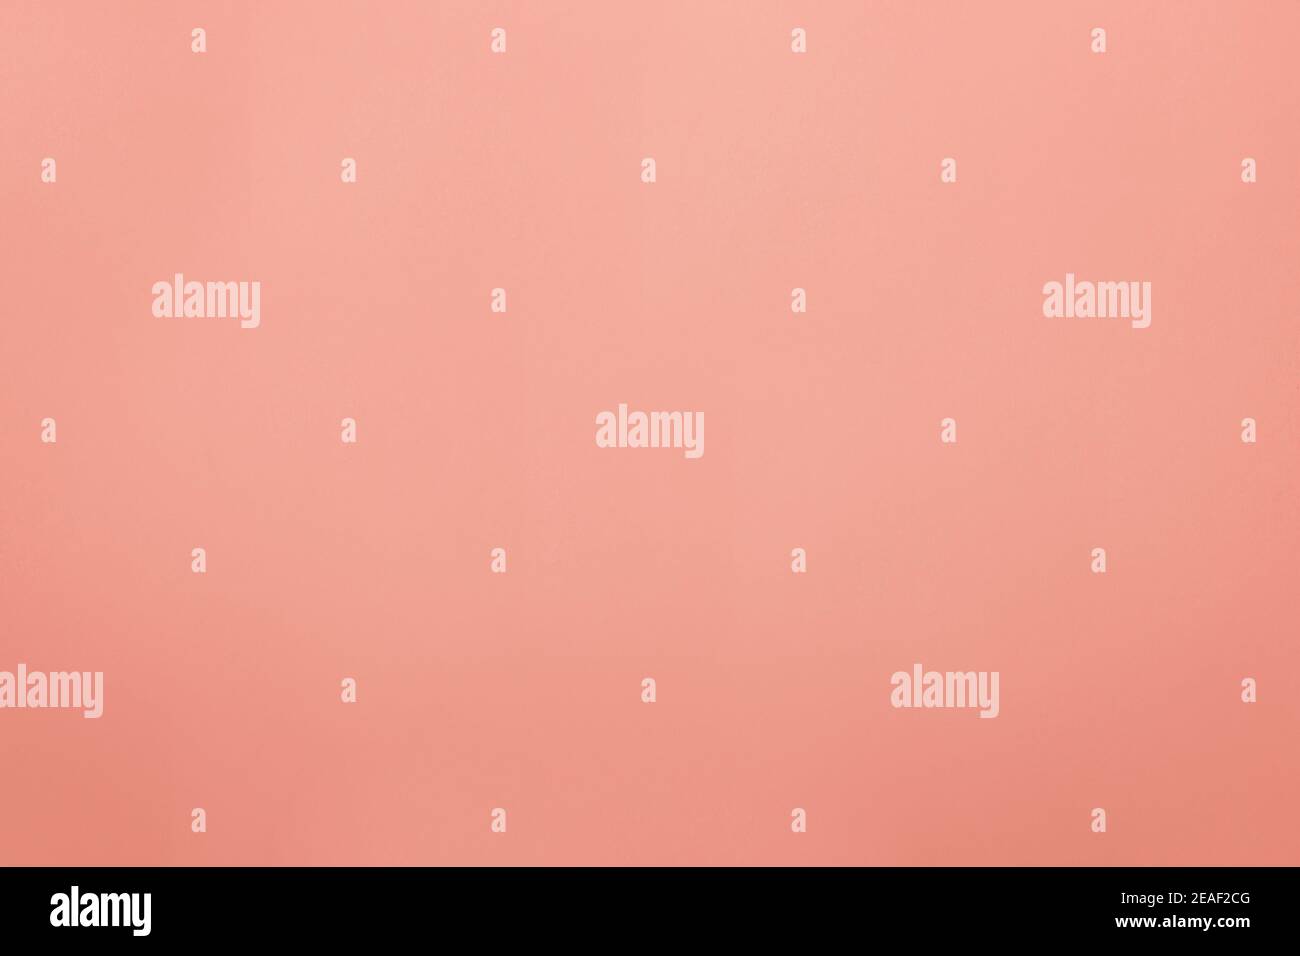 pink peach clean background for own design Stock Photo